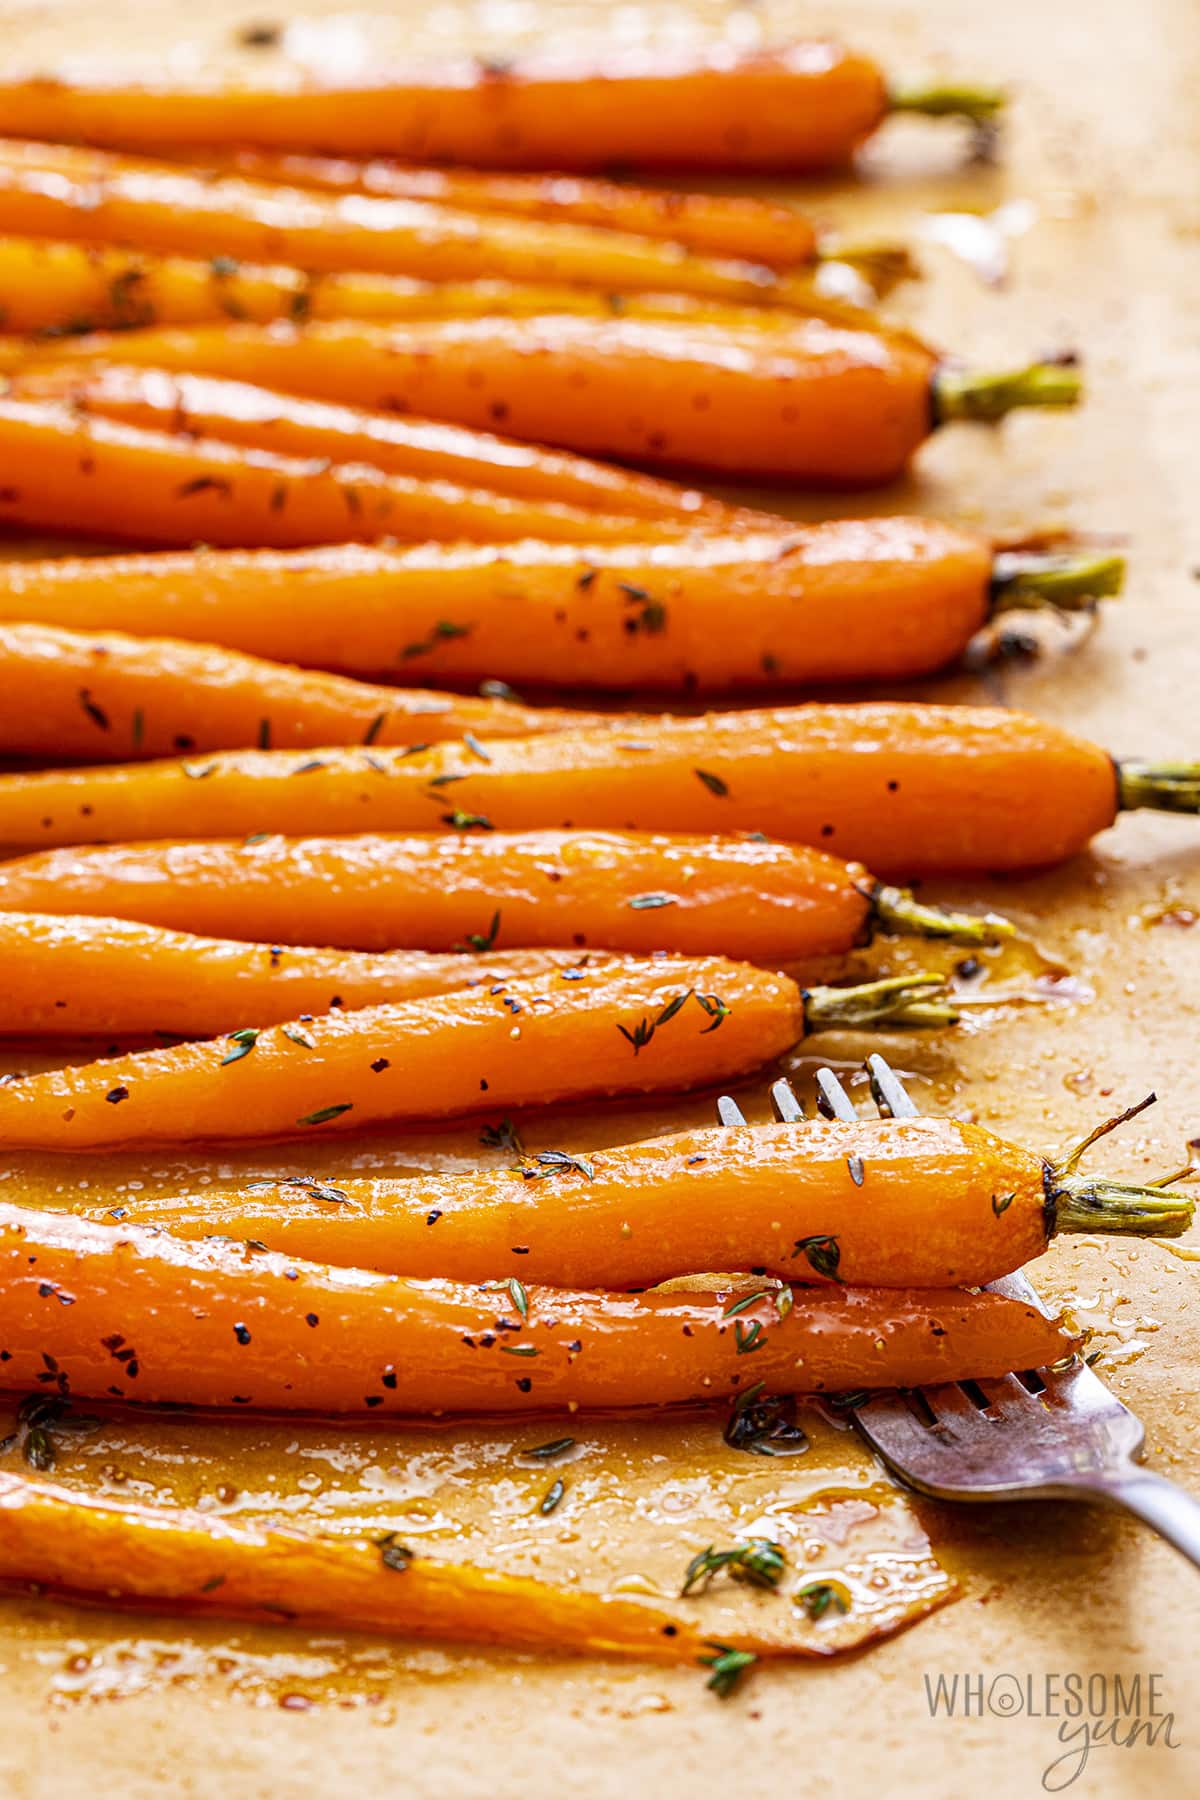 Oven roasted carrots on a sheet pan.